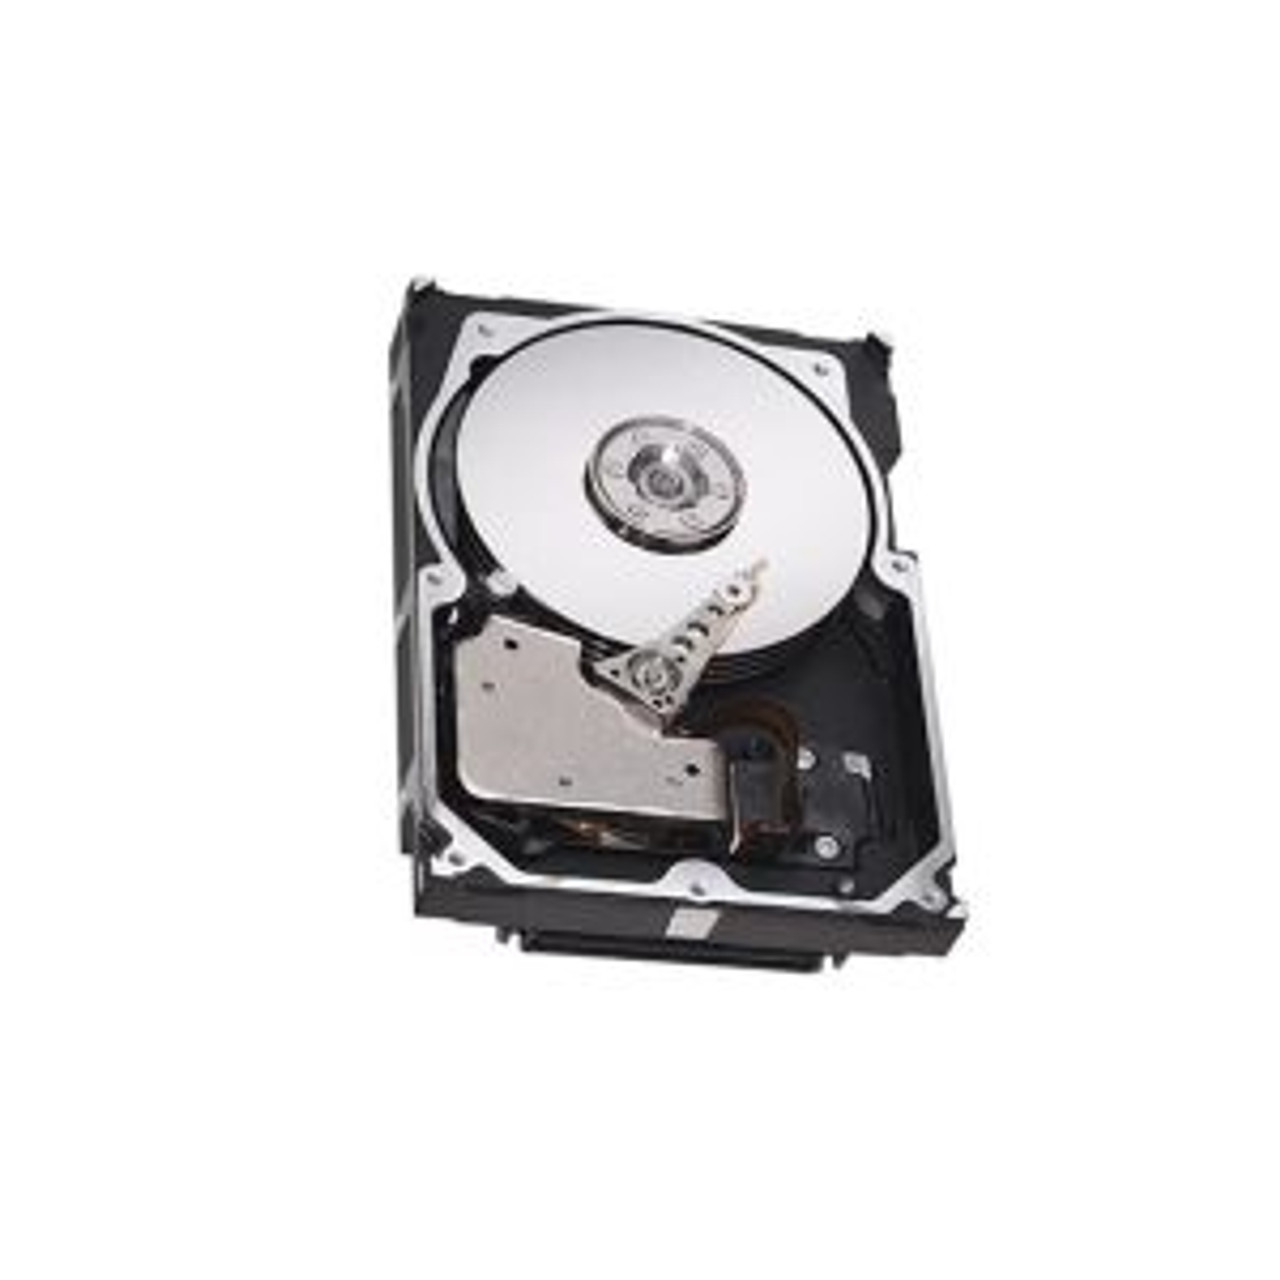 5G5G5 | Dell | 2TB 7200RPM SAS 12Gb/s 3.5-inch NL 512N Hard Drive Gen. 13 with Tray